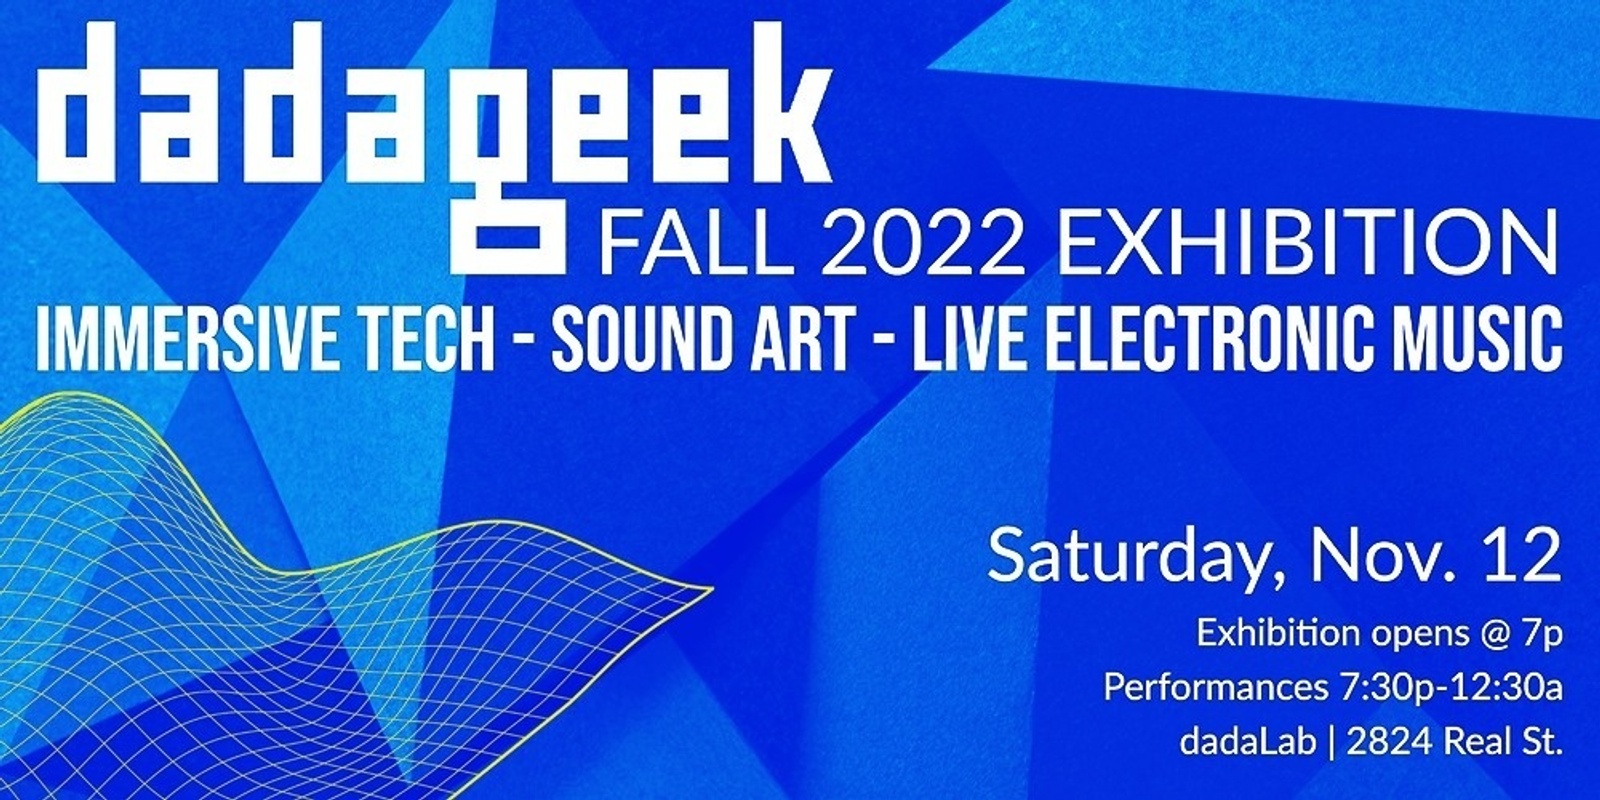 Banner image for dadageek Fall 2022 Exhibition